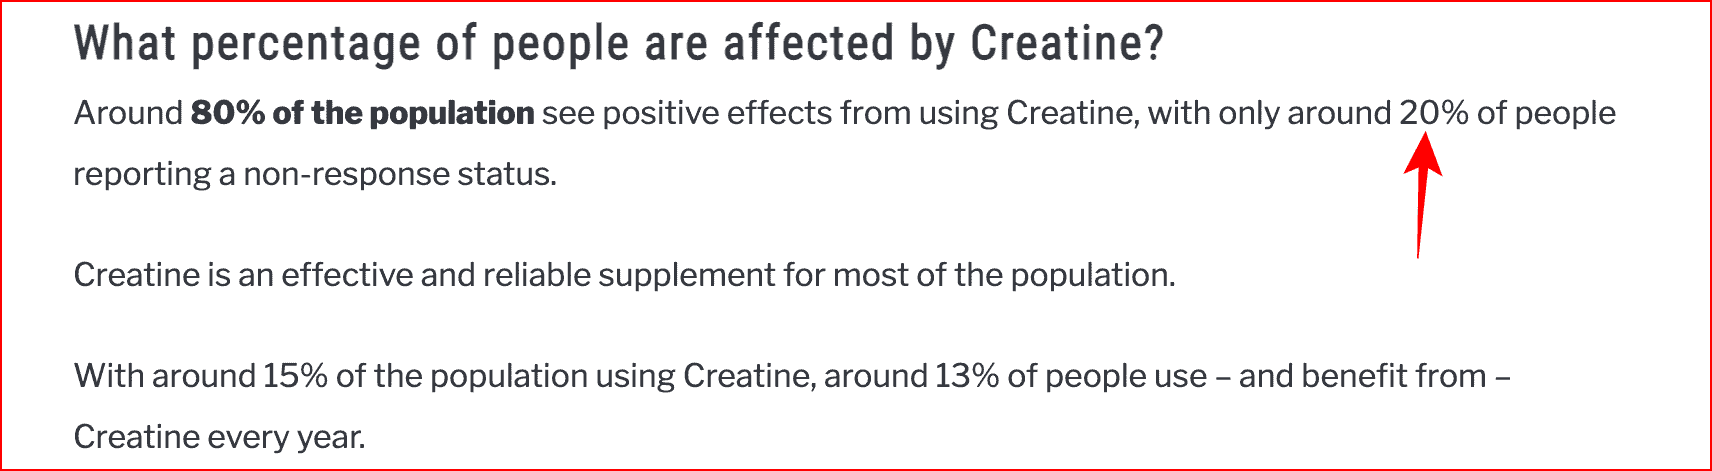 Creatine effects on users